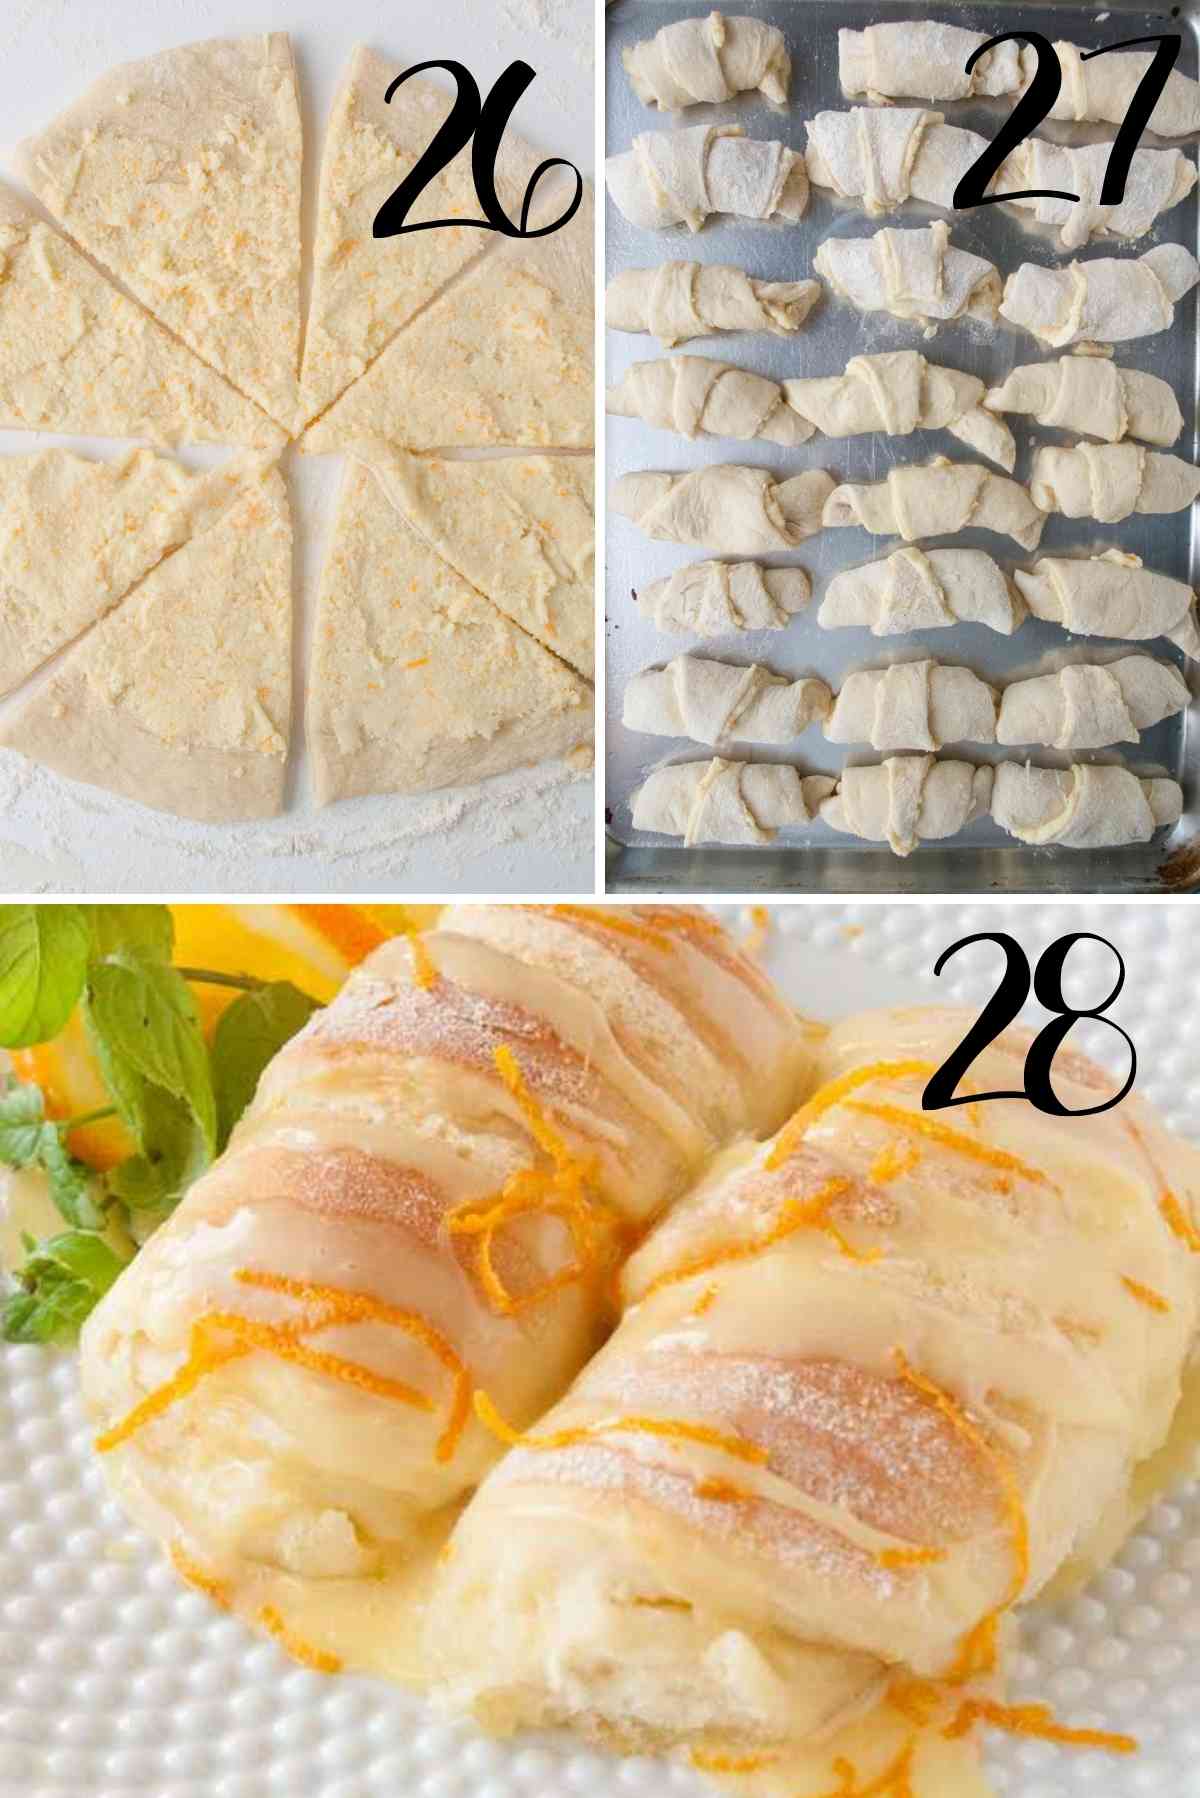 Dough rolled in a circle, spread with filling, cut into triangles, and rolled up.